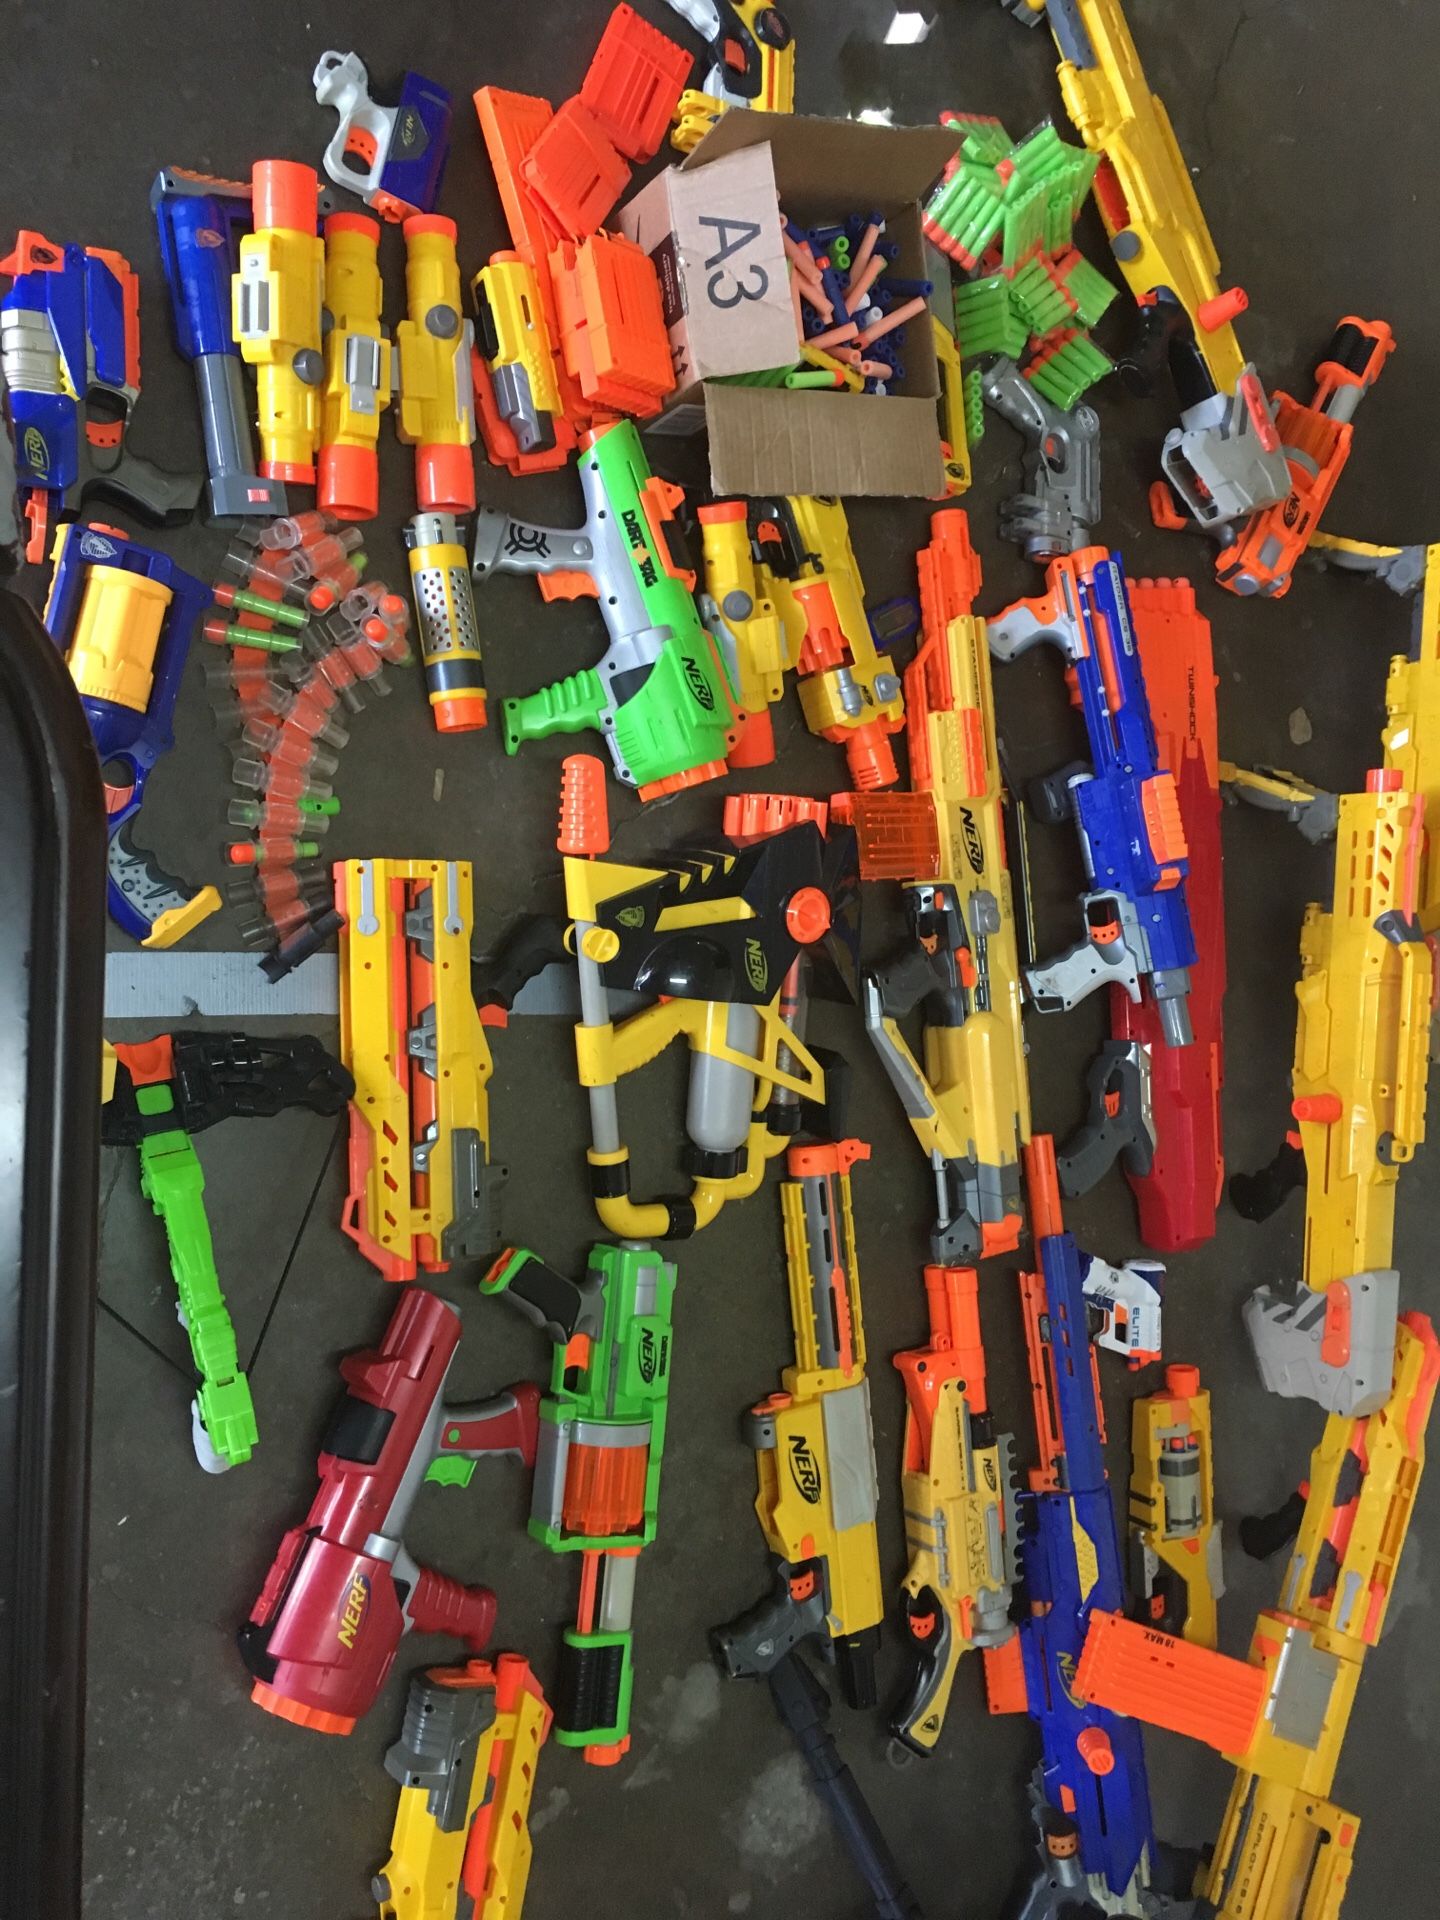 30 nerf guns and over 200 bullets